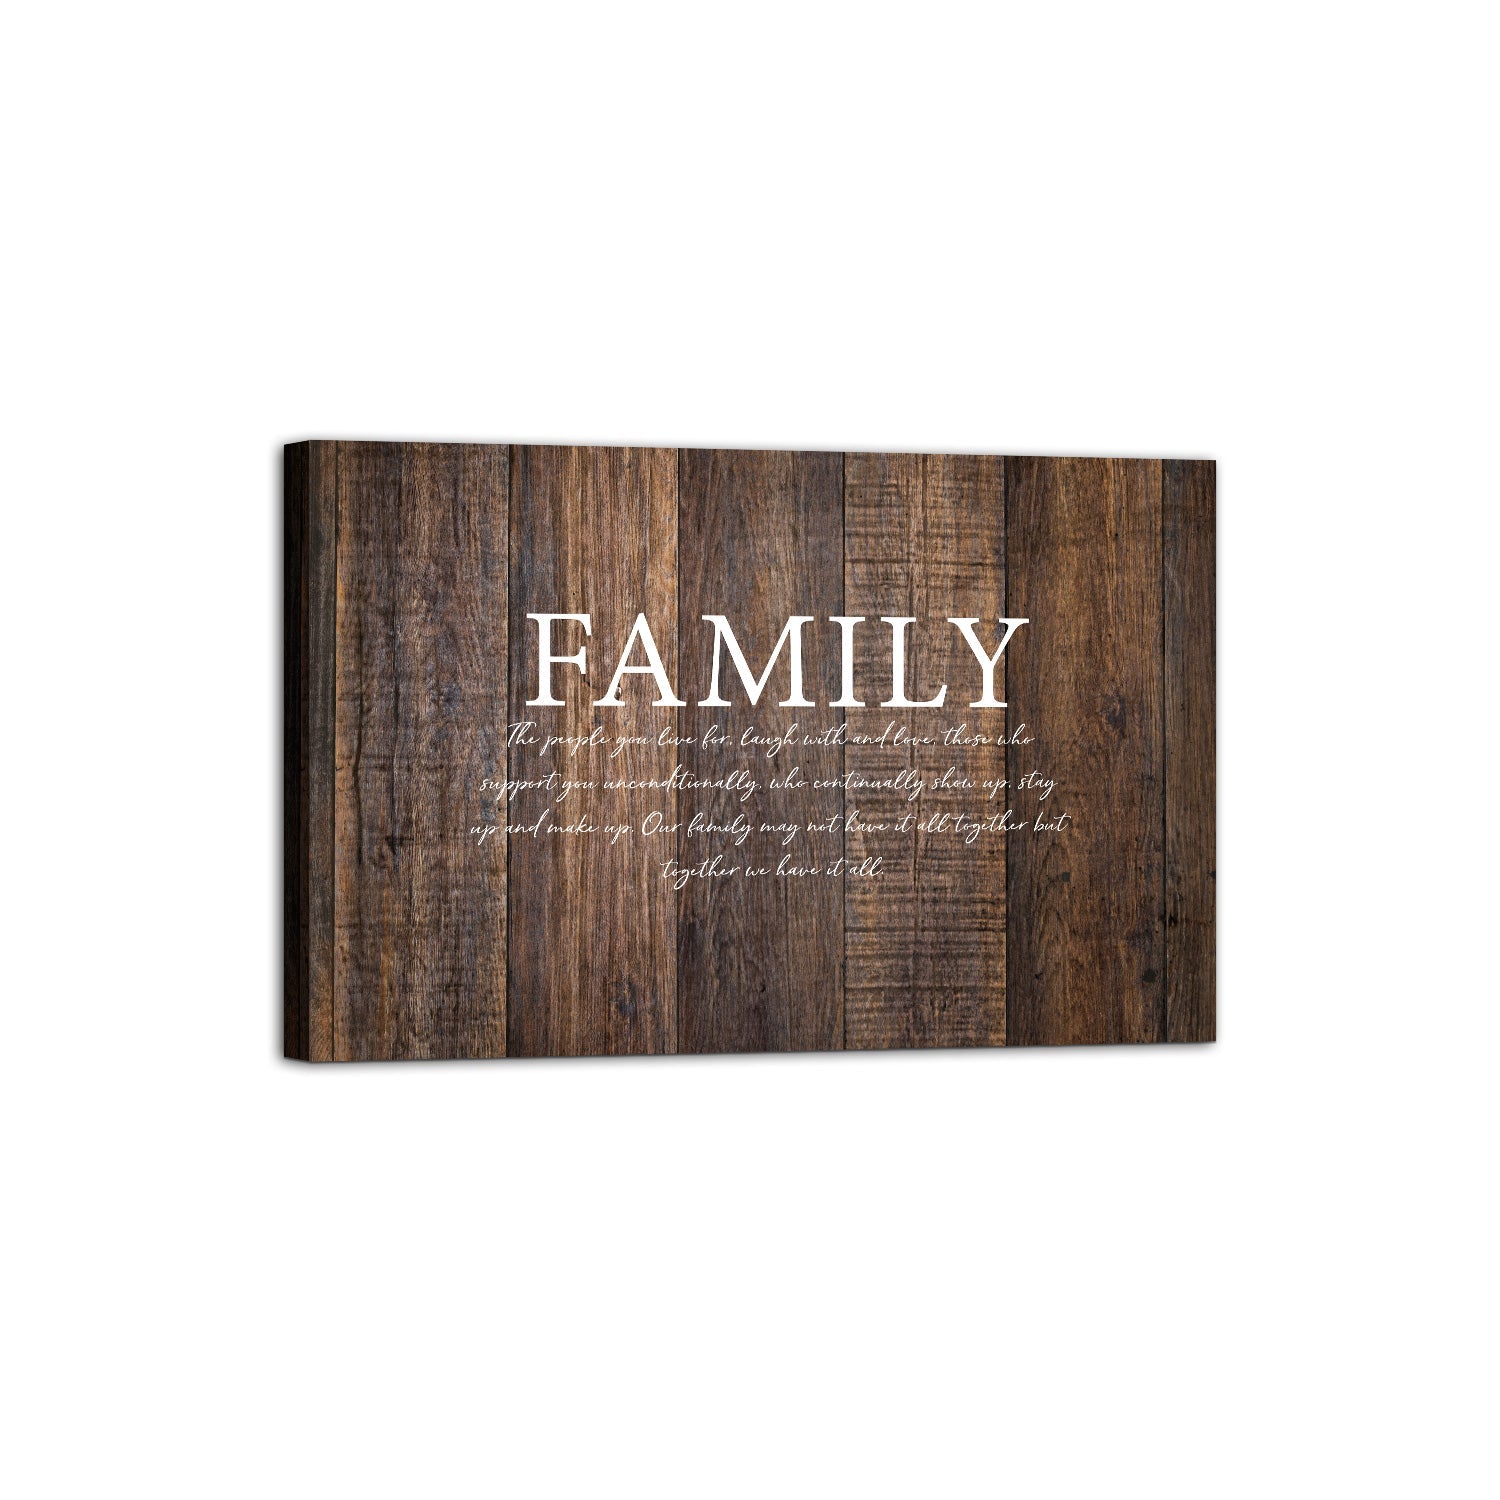 Family Home - Every Love Story is Beautiful Inspirational Canvas Wall Art Framed Modern Wall Decor Decorative Accents For Walls Ready to Hang for Home Living Room Bedroom Entryway Kitchen Office 24”x16” - LifeSong Milestones